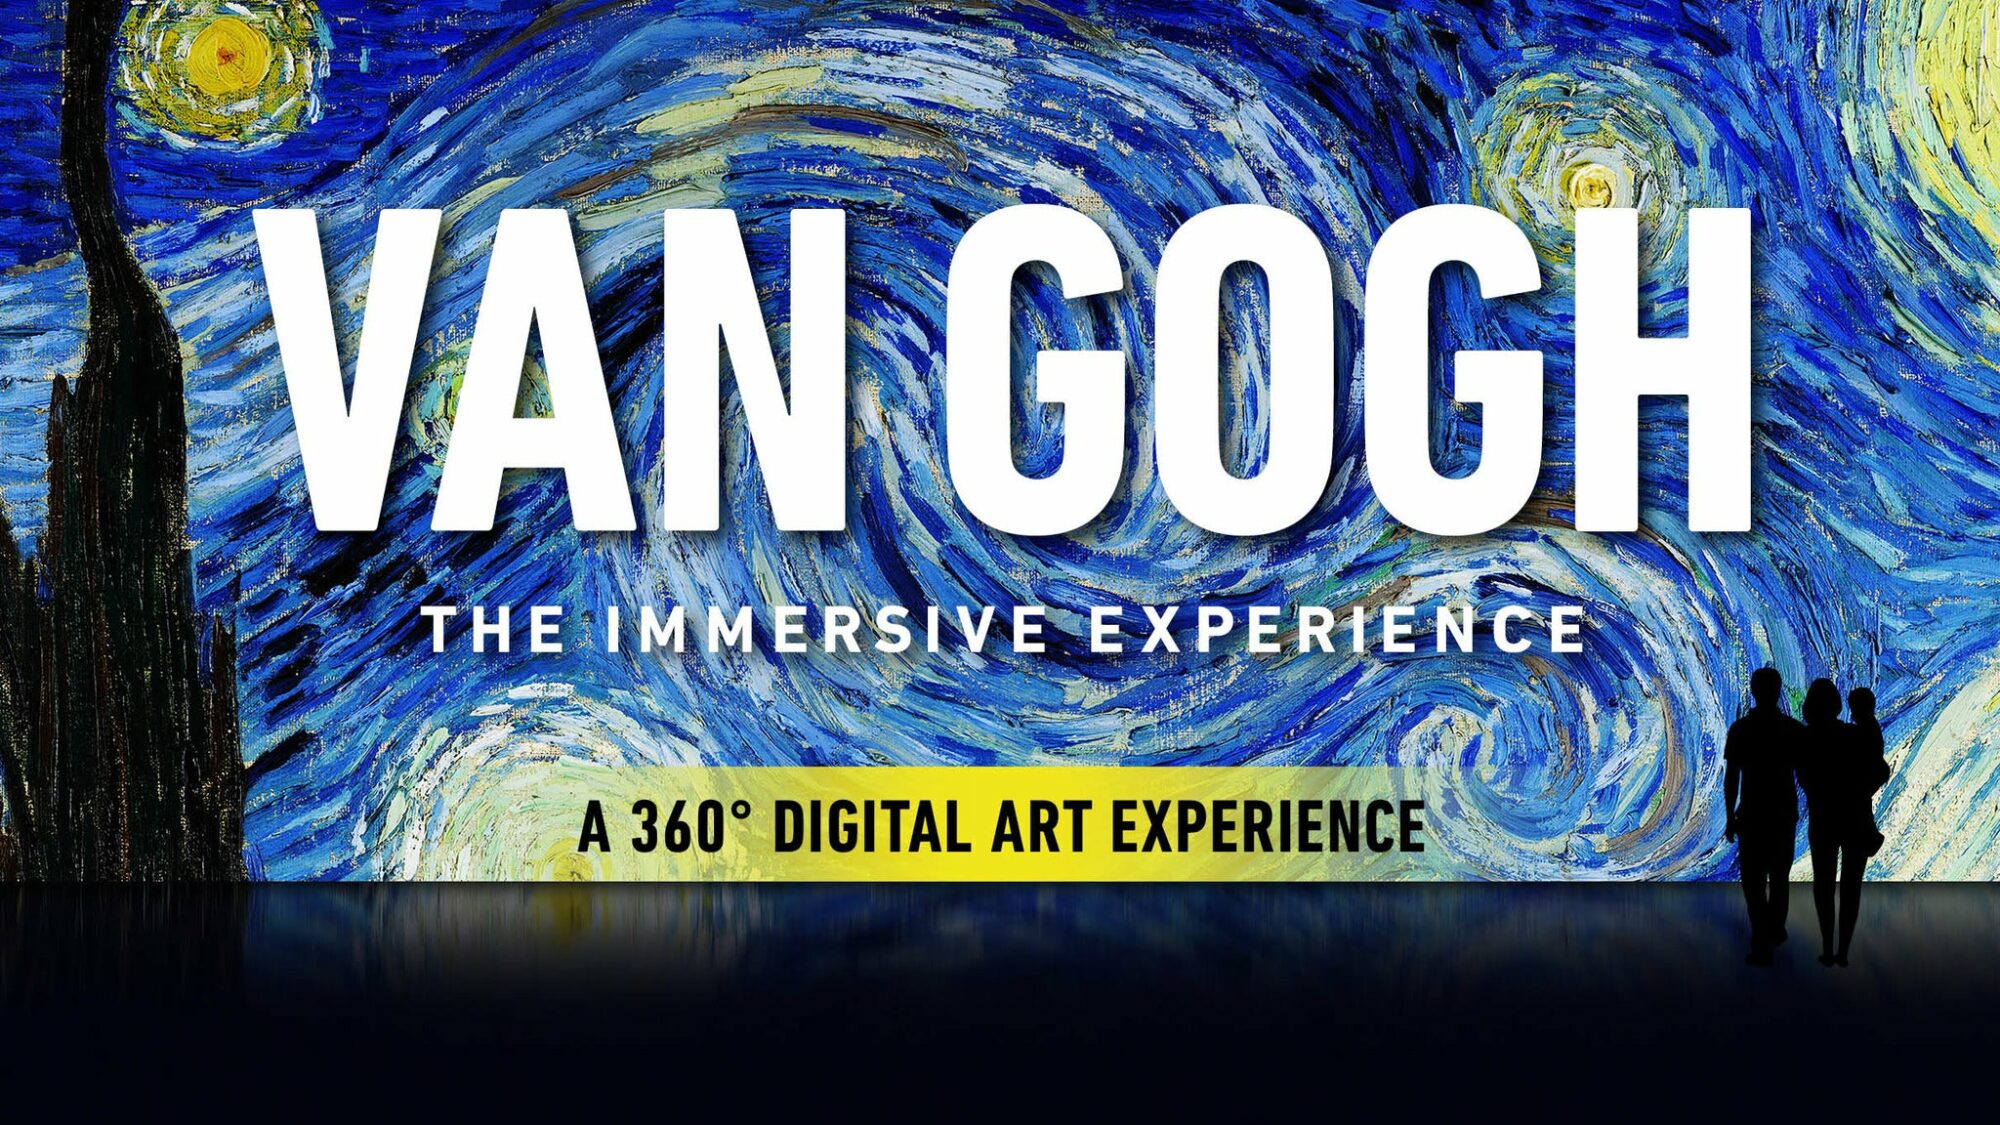 Image name Van Gogh the Immersive Experience York at York St. Marys York the 2 image from the post Van Gogh: the Immersive Experience (York) at York St. Mary's, York in Yorkshire.com.